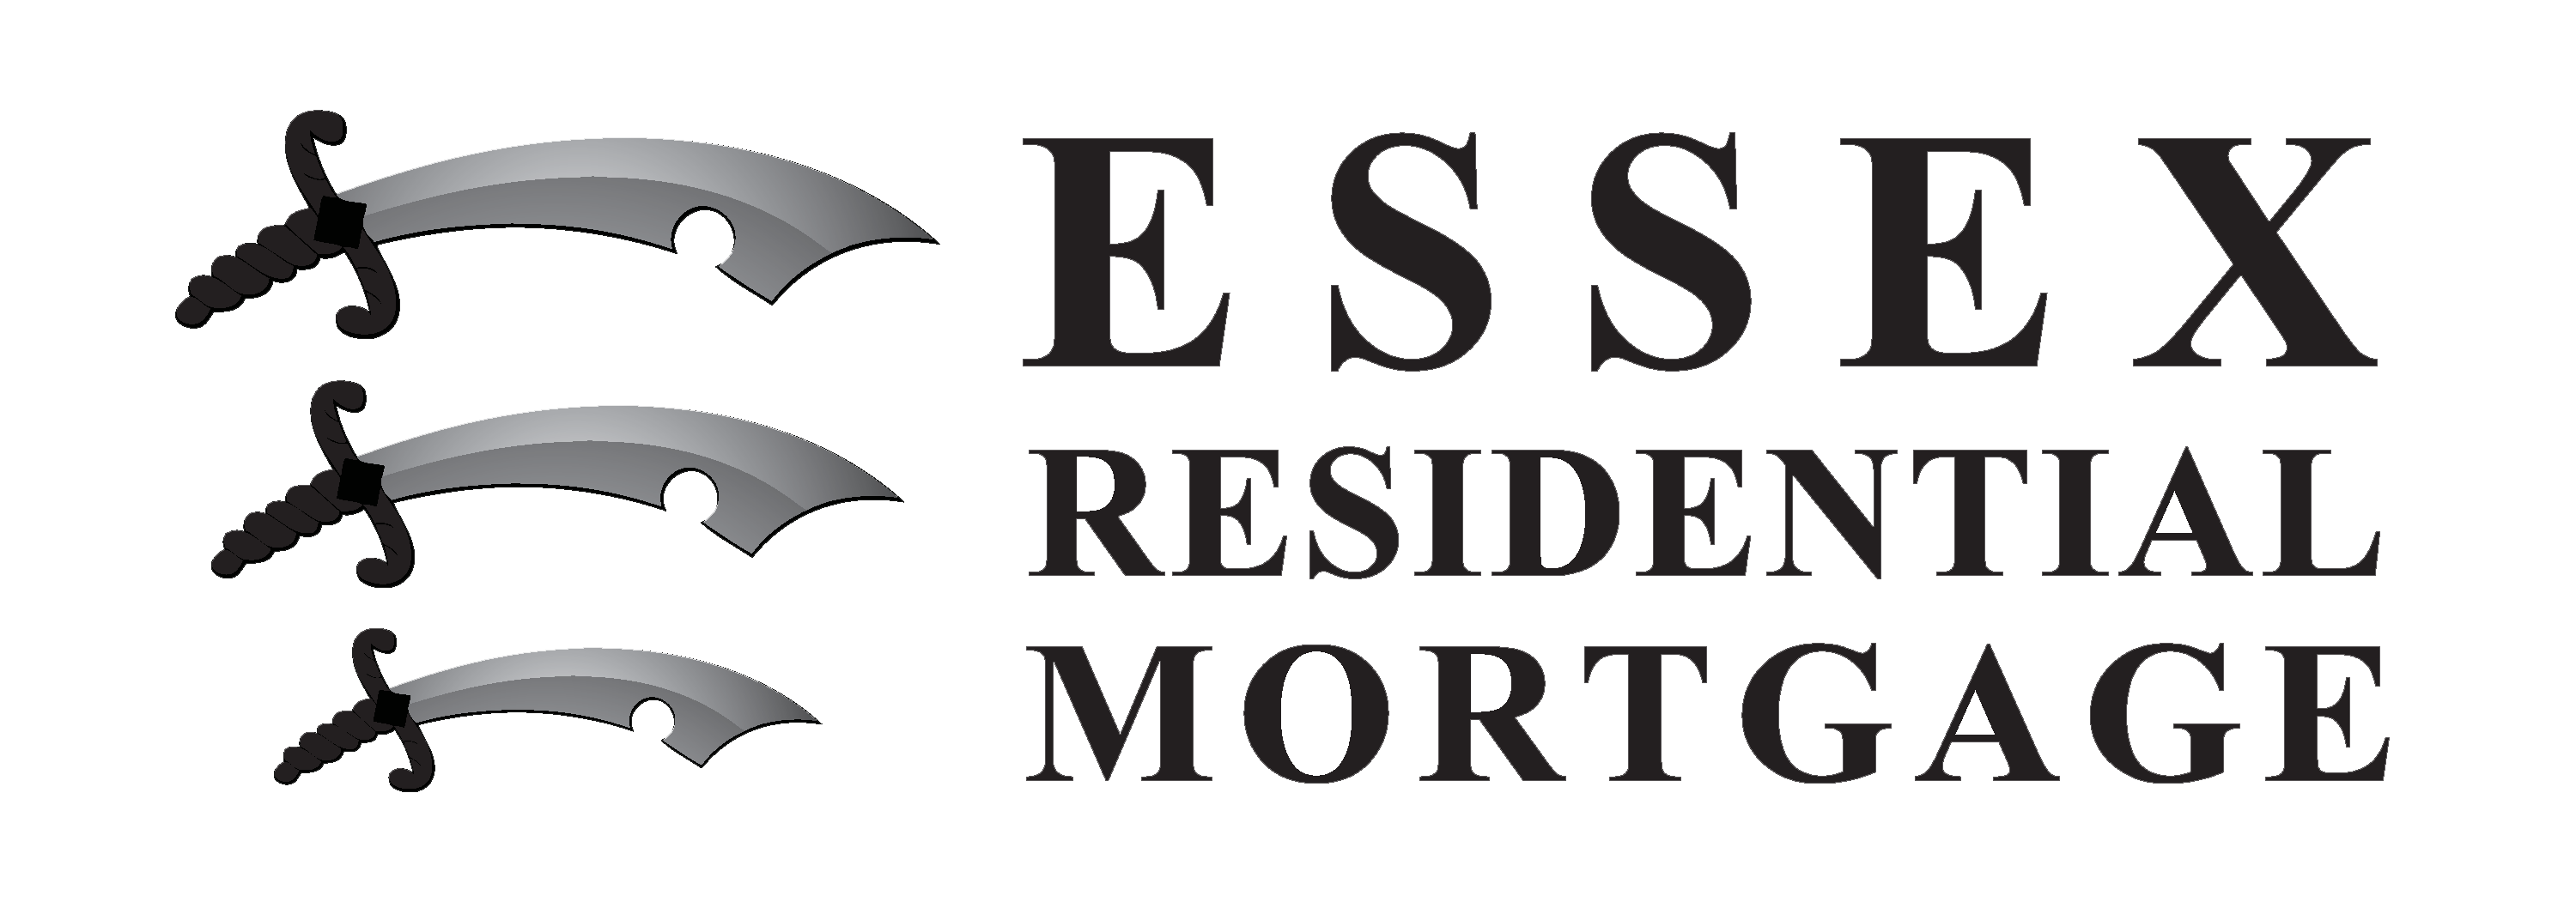 Essex Residential Mortgage